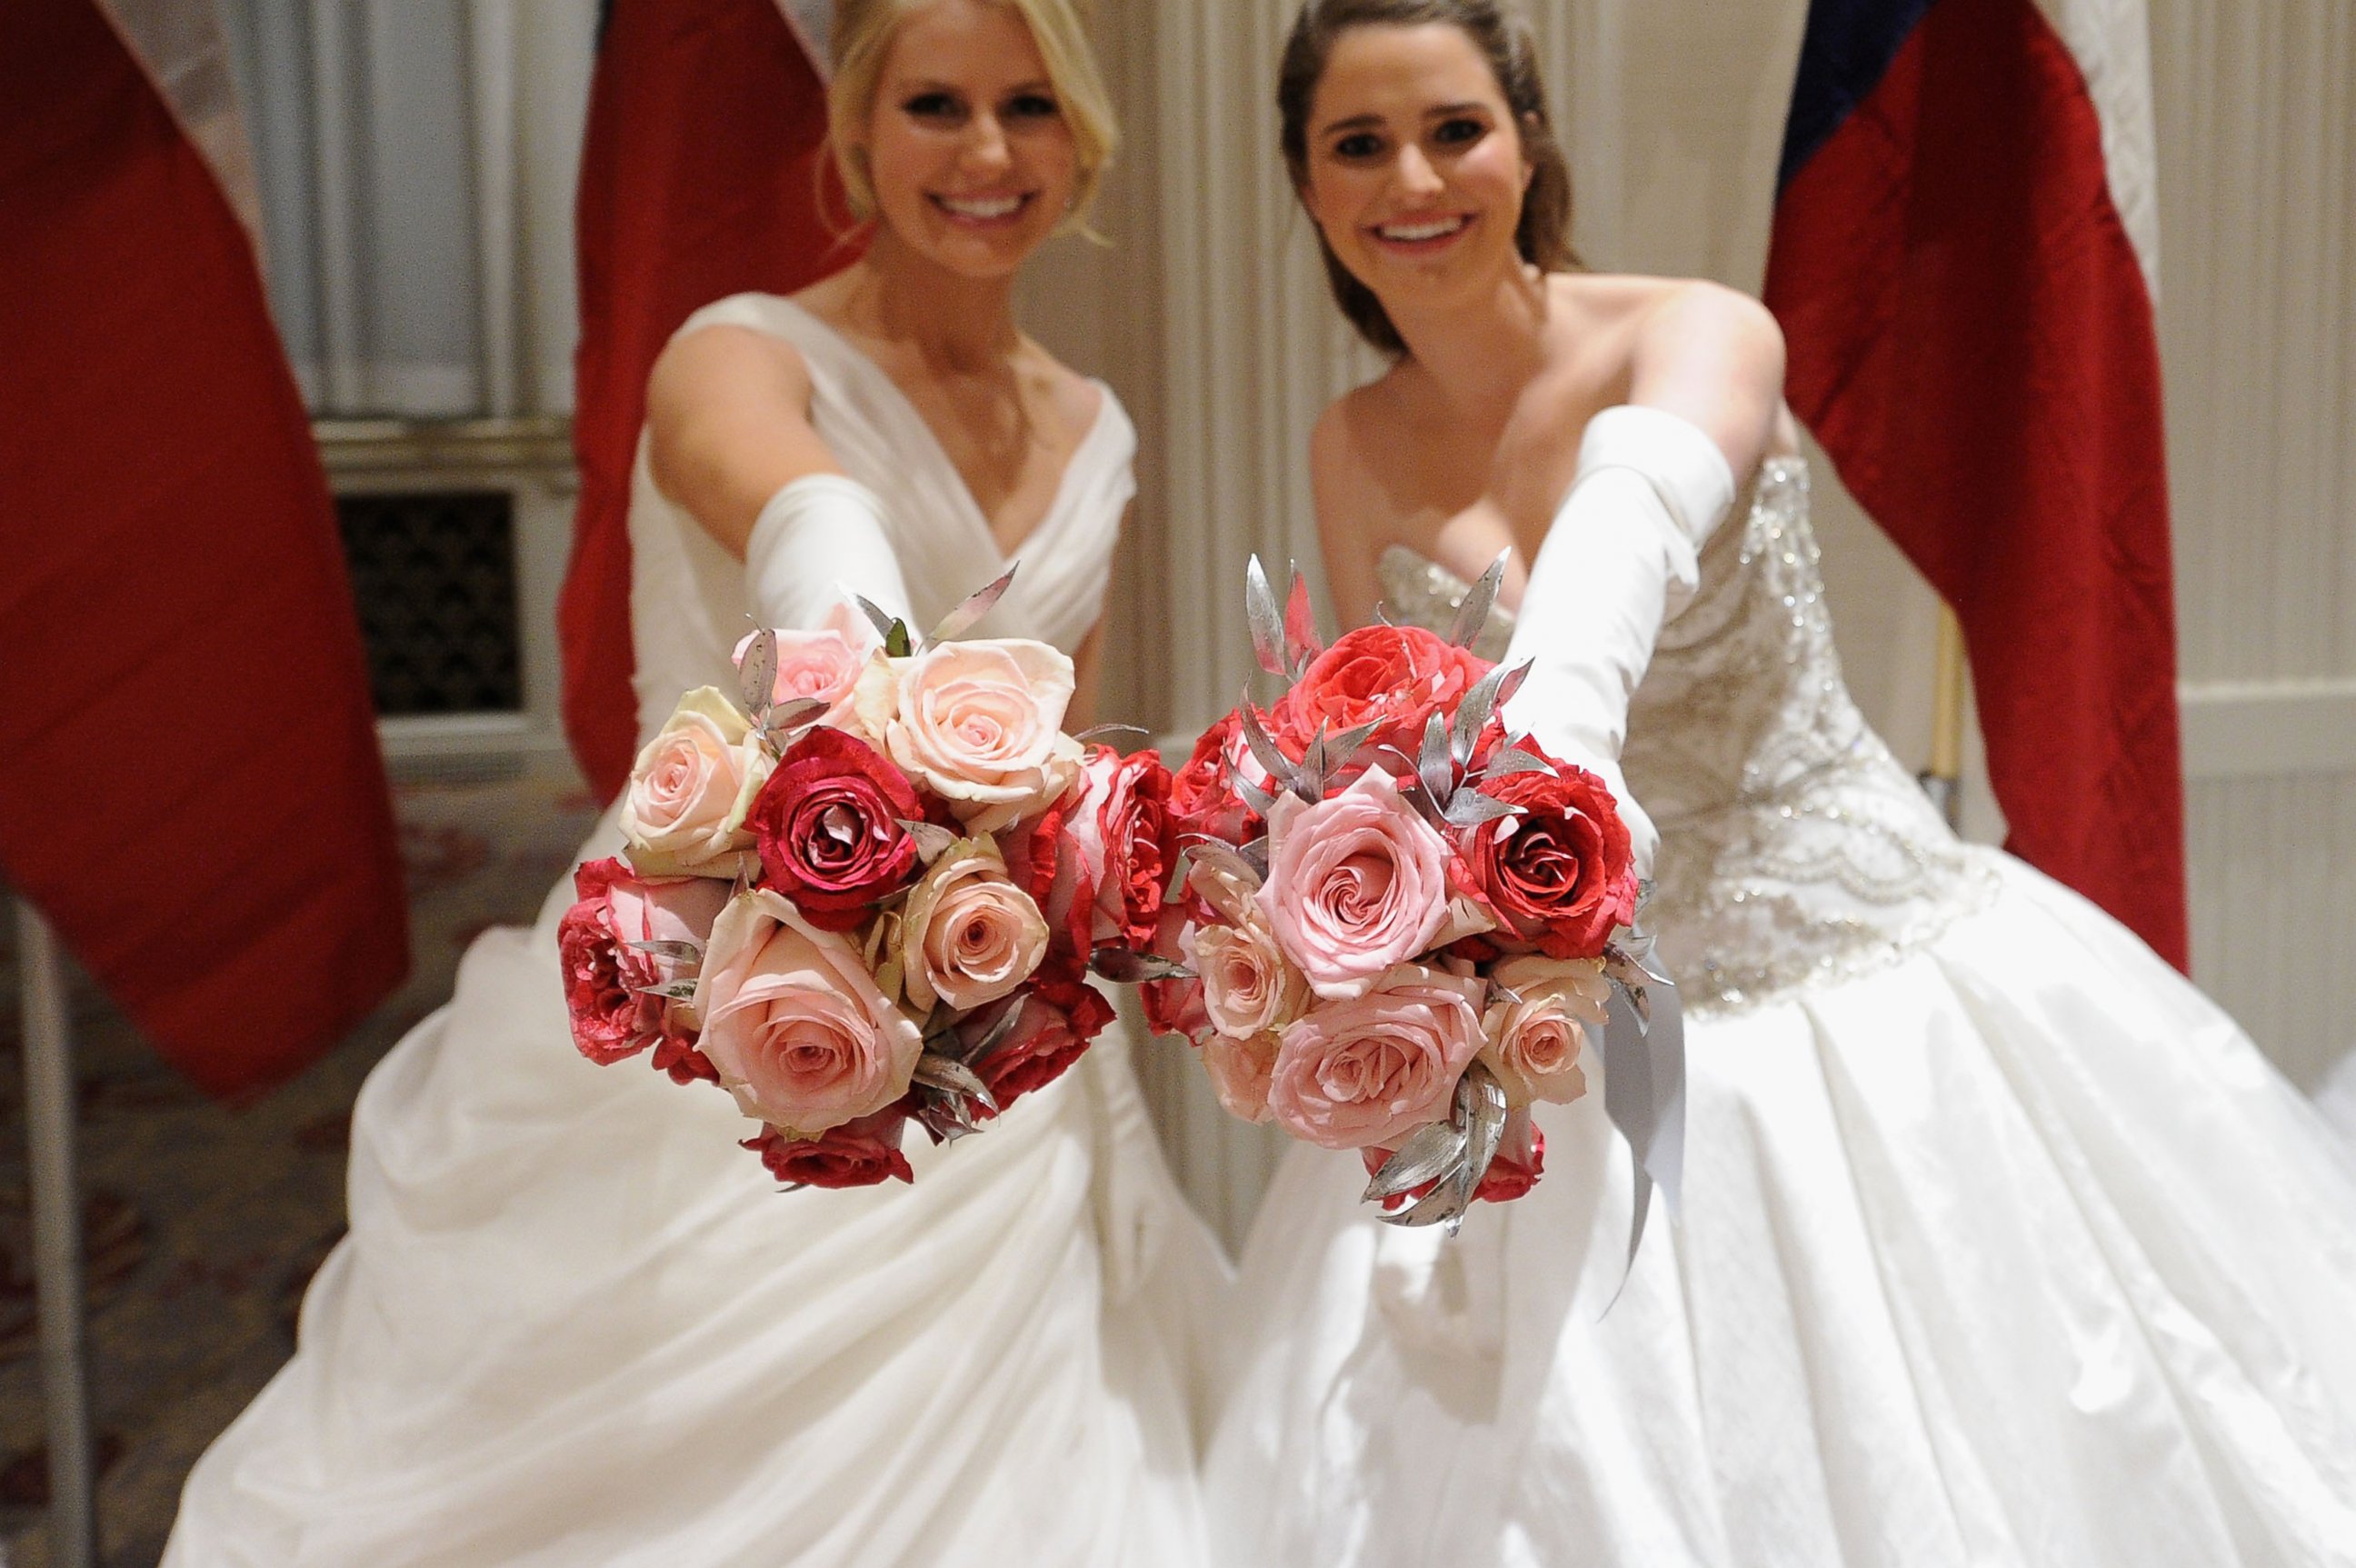 PHOTO: Debutantes attend the 60th International Debutante Ball at The Waldorf Astoria on Dec. 29, 2014 in New York City.